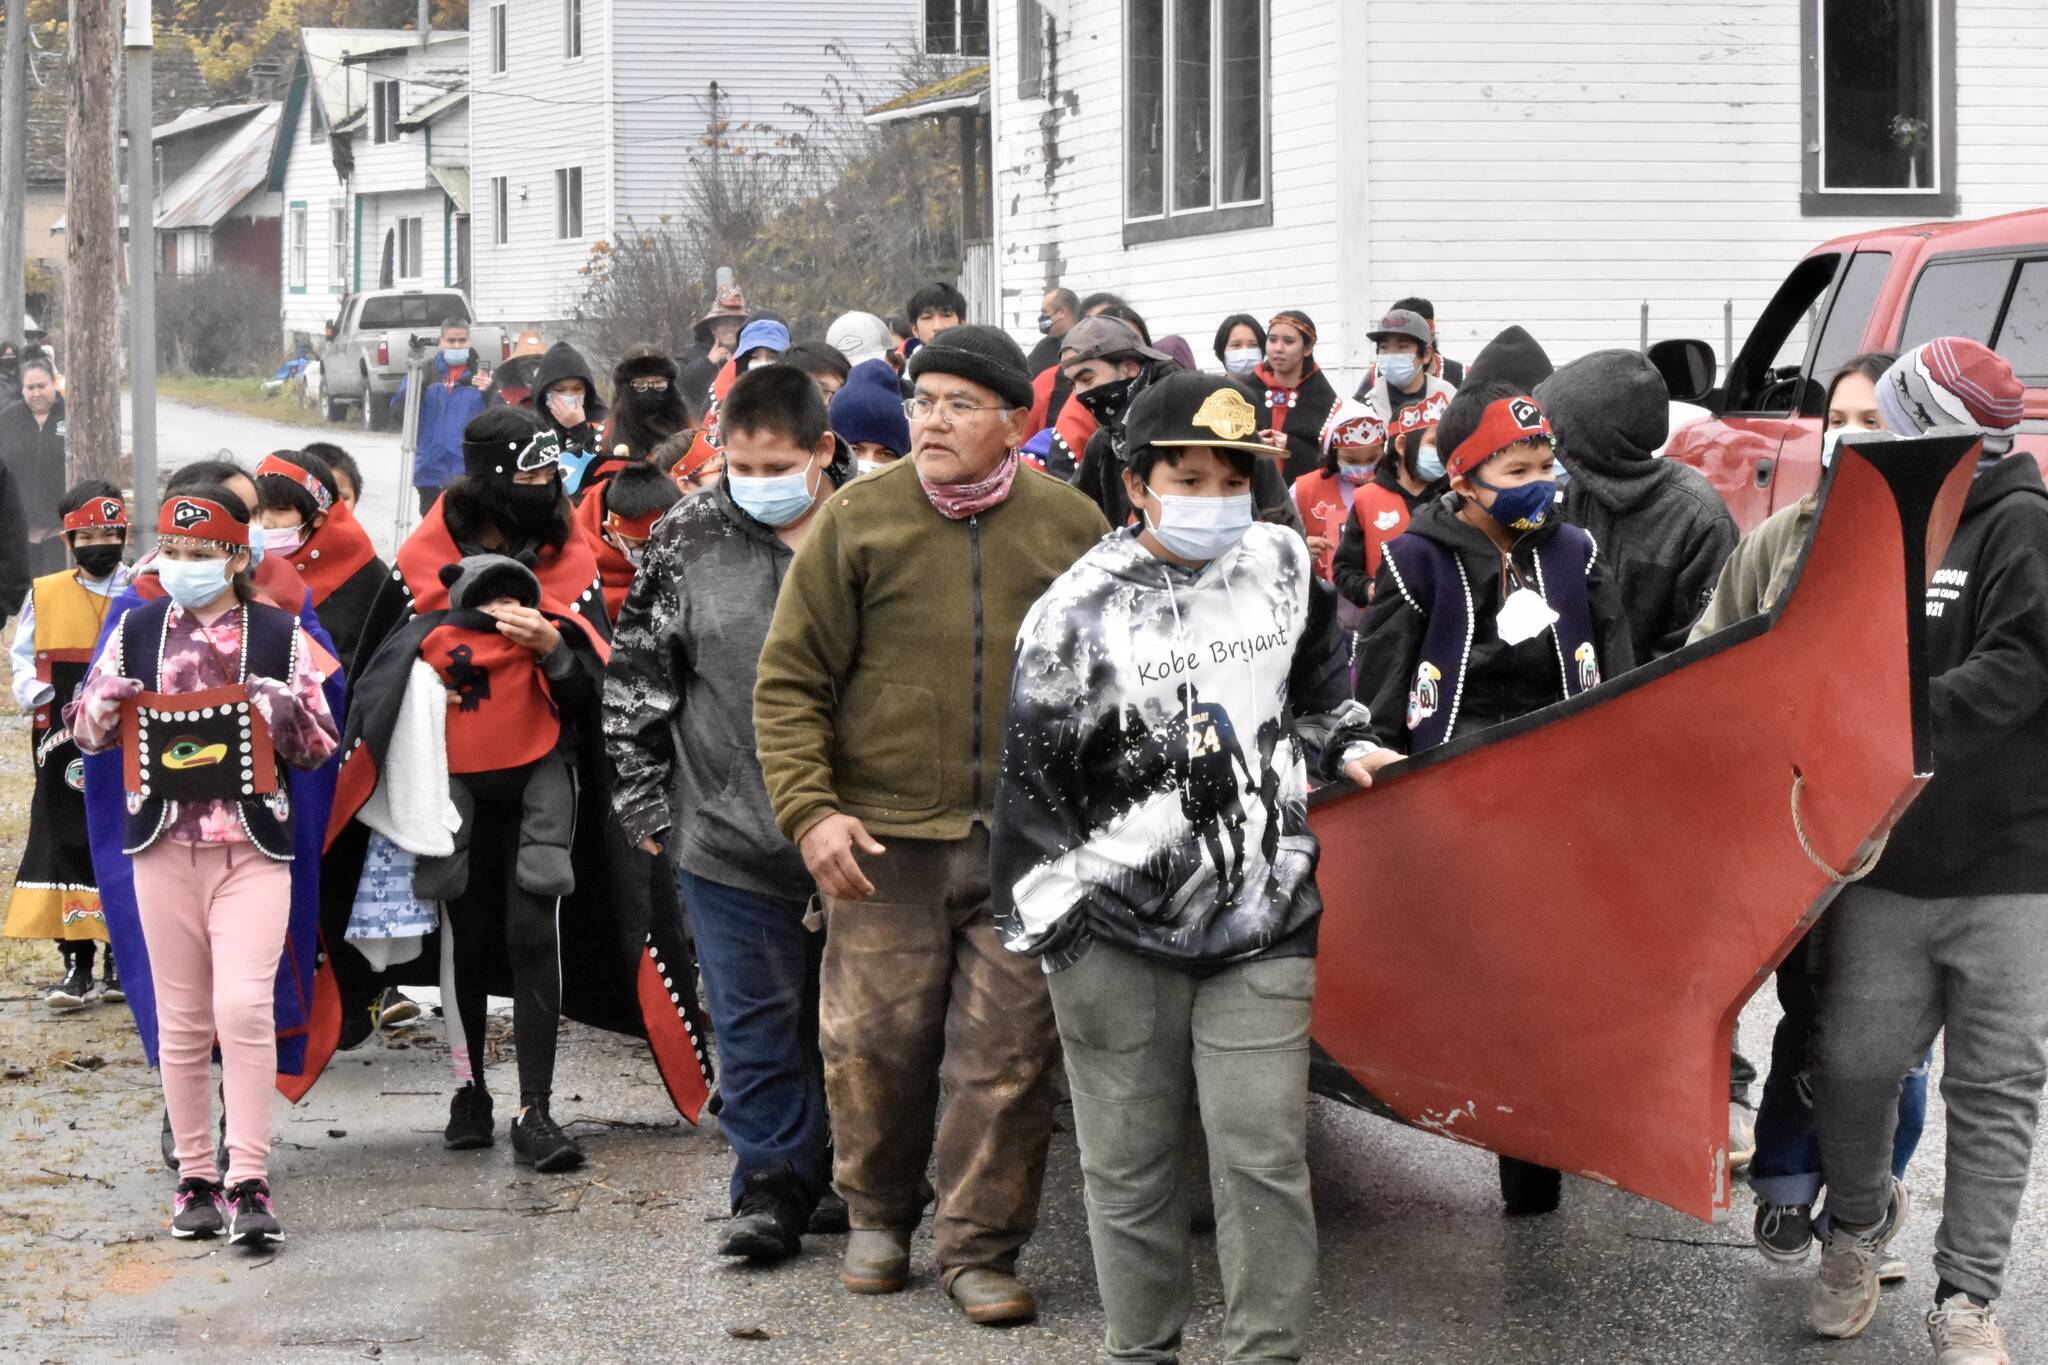 Students in Angoon march down the city’s waterfront on Oct. 26, 2021, to celebrate the anniversary of a bombardment by the U.S. Navy in 1882. Angoon residents chanted and sang as they wheeled the boat along the street just above the beach where similar canoes were destroyed 139 years ago. (Peter Segall / Juneau Empire)
Students in Angoon march down the city’s waterfront on Oct. 26, 2021, to celebrate the anniversary of a bombardment by the U.S. Navy in 1882. Angoon residents chanted and sang as they wheeled the boat along the street just above the beach where similar canoes were destroyed 139 years ago. (Peter Segall / Juneau Empire)